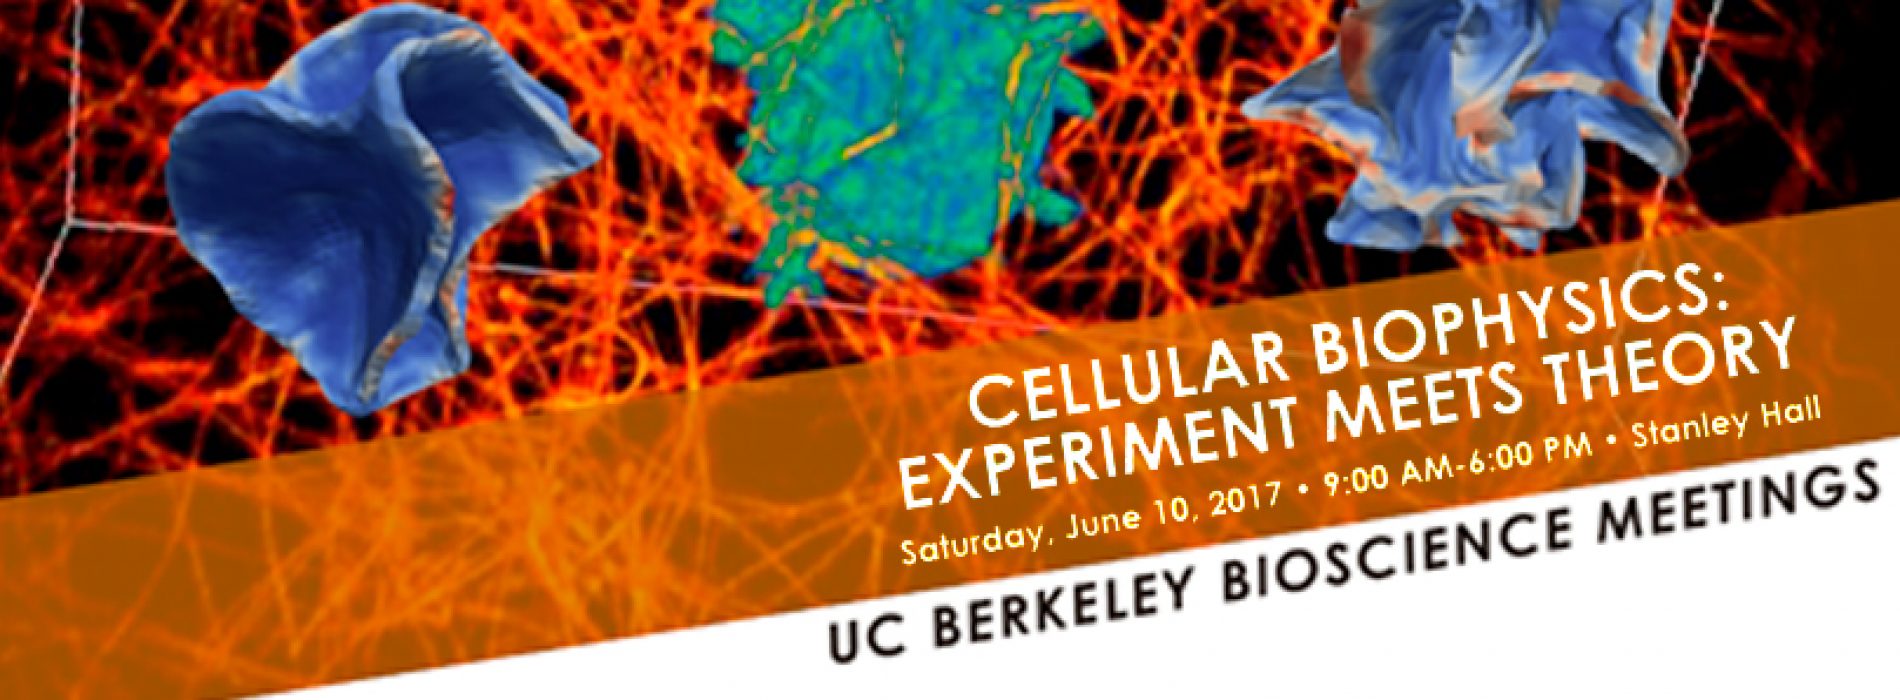 Cellular Biophysics: Experiment meets Theory – June 10 – Sign up now!